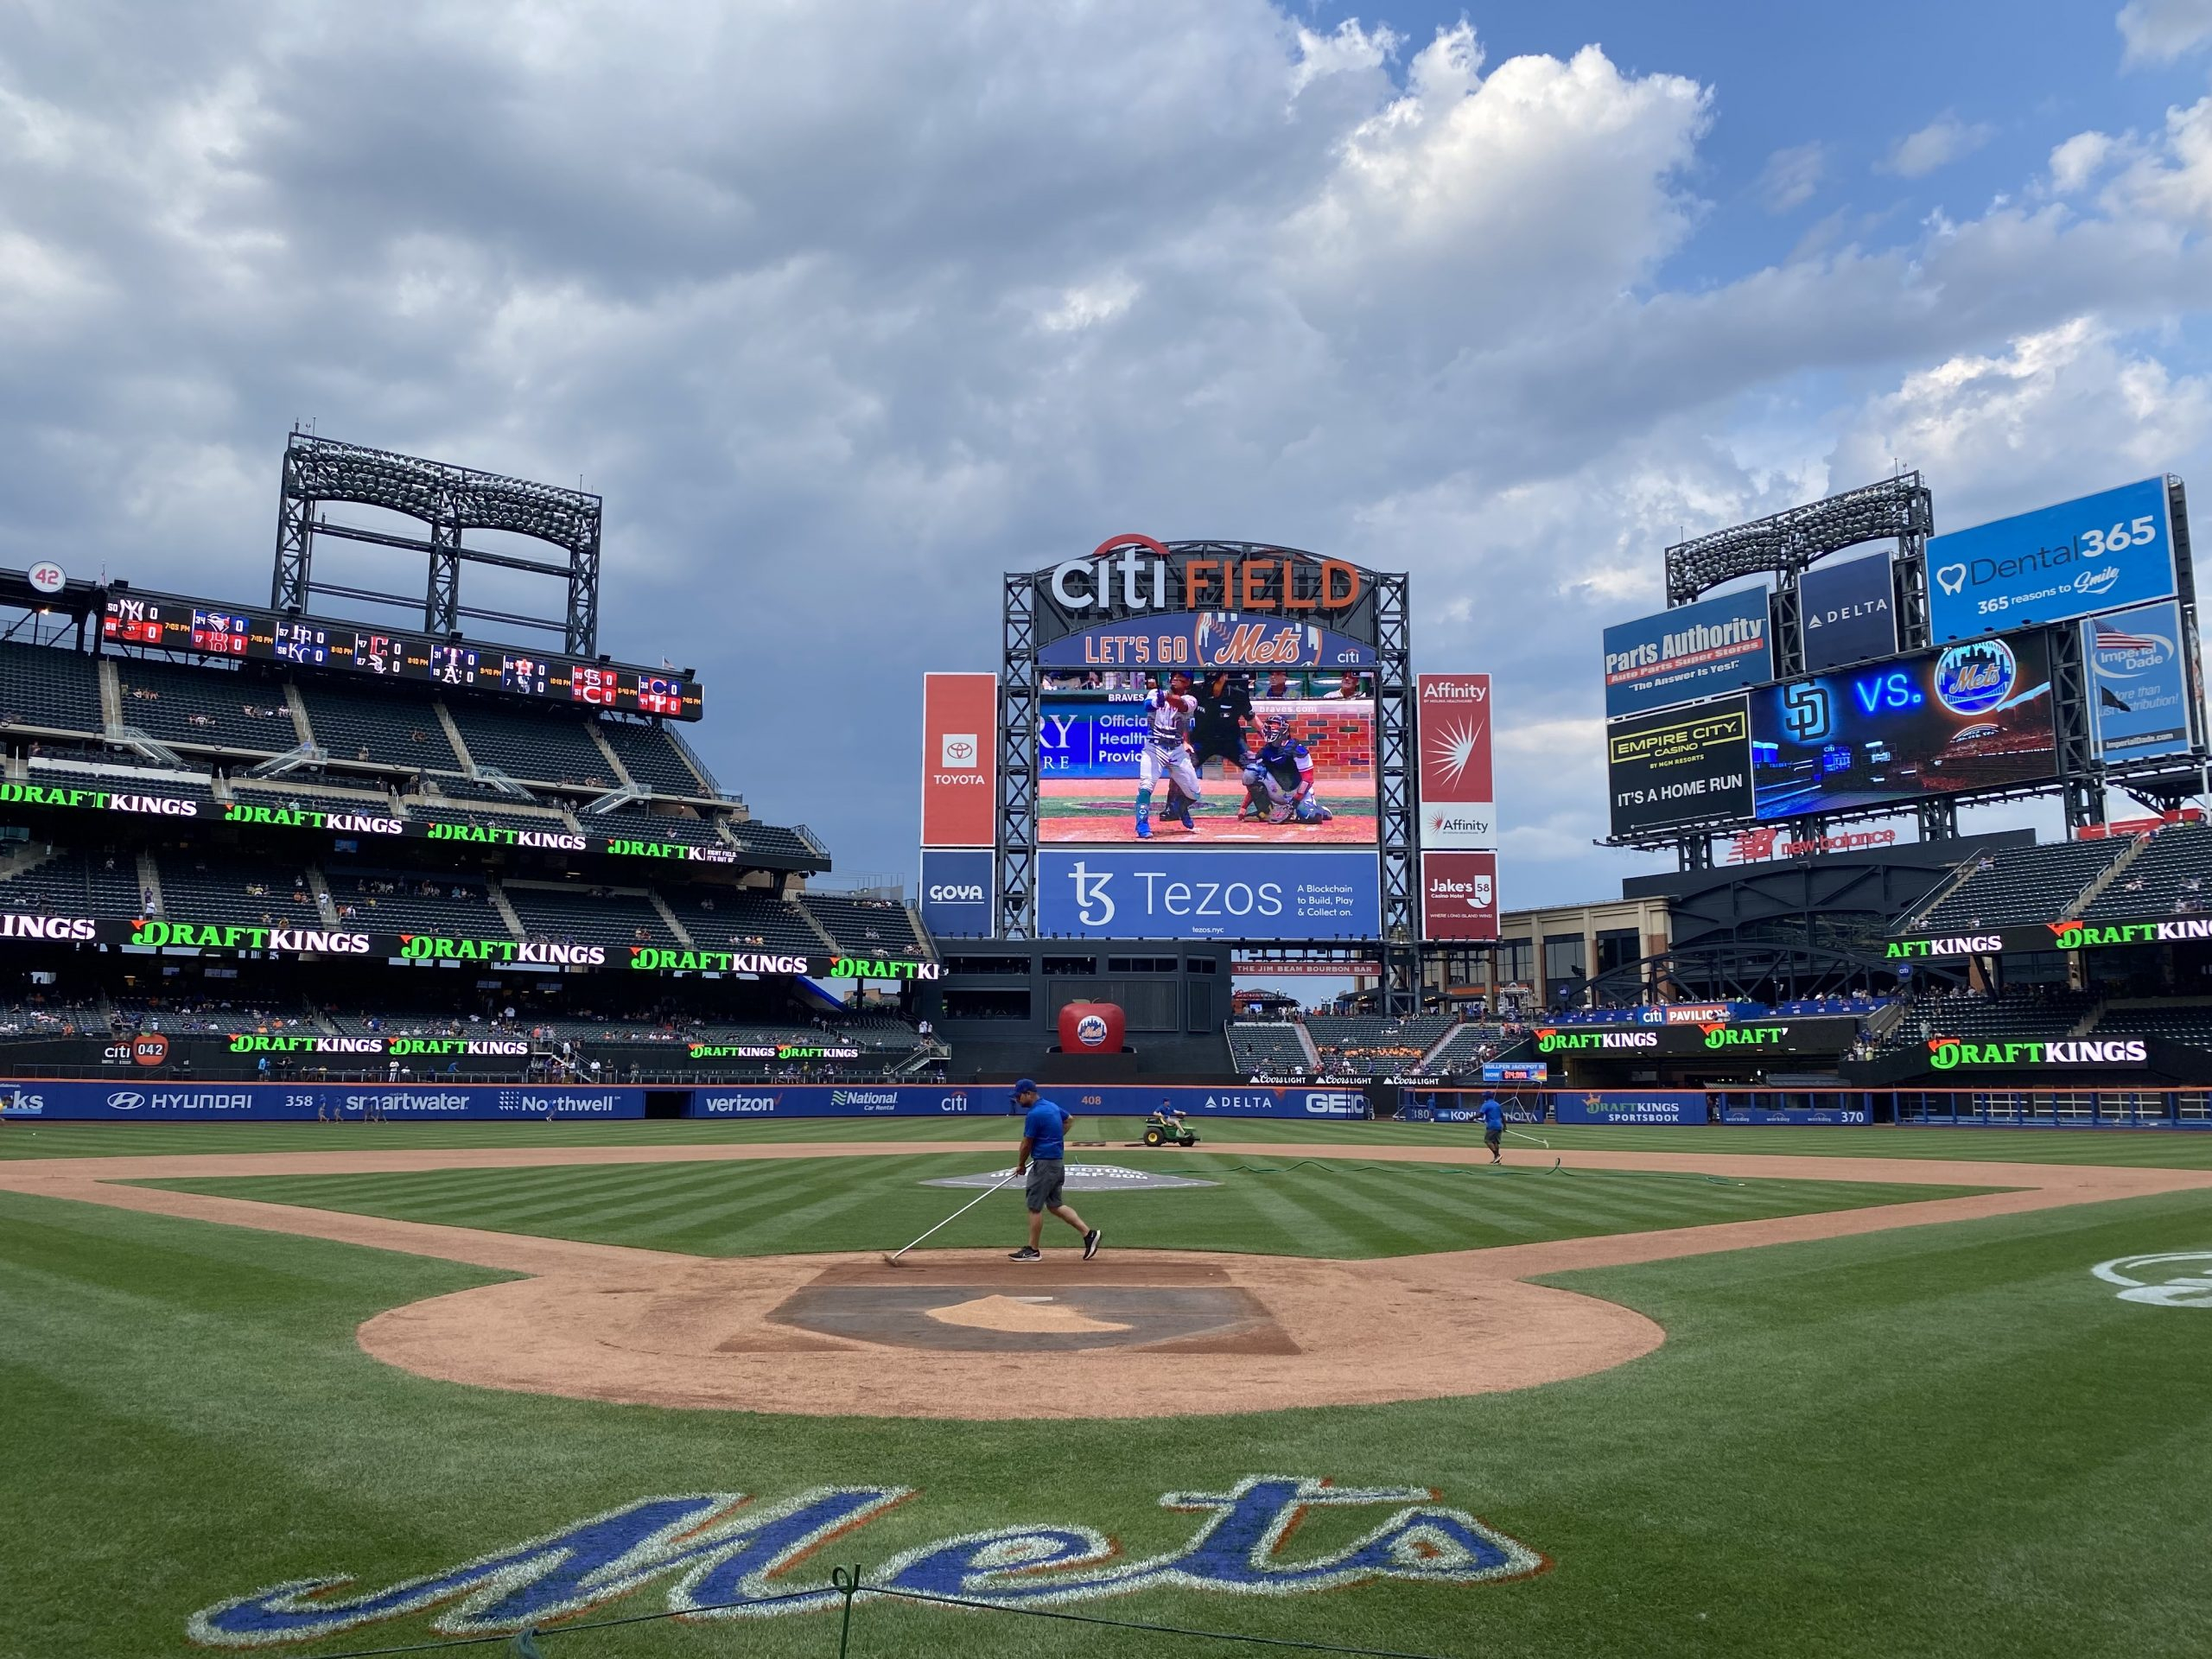 2560x1920 New York Mets Enhance Game-Day Experience at Citi Field With Significant Tech Upgrades